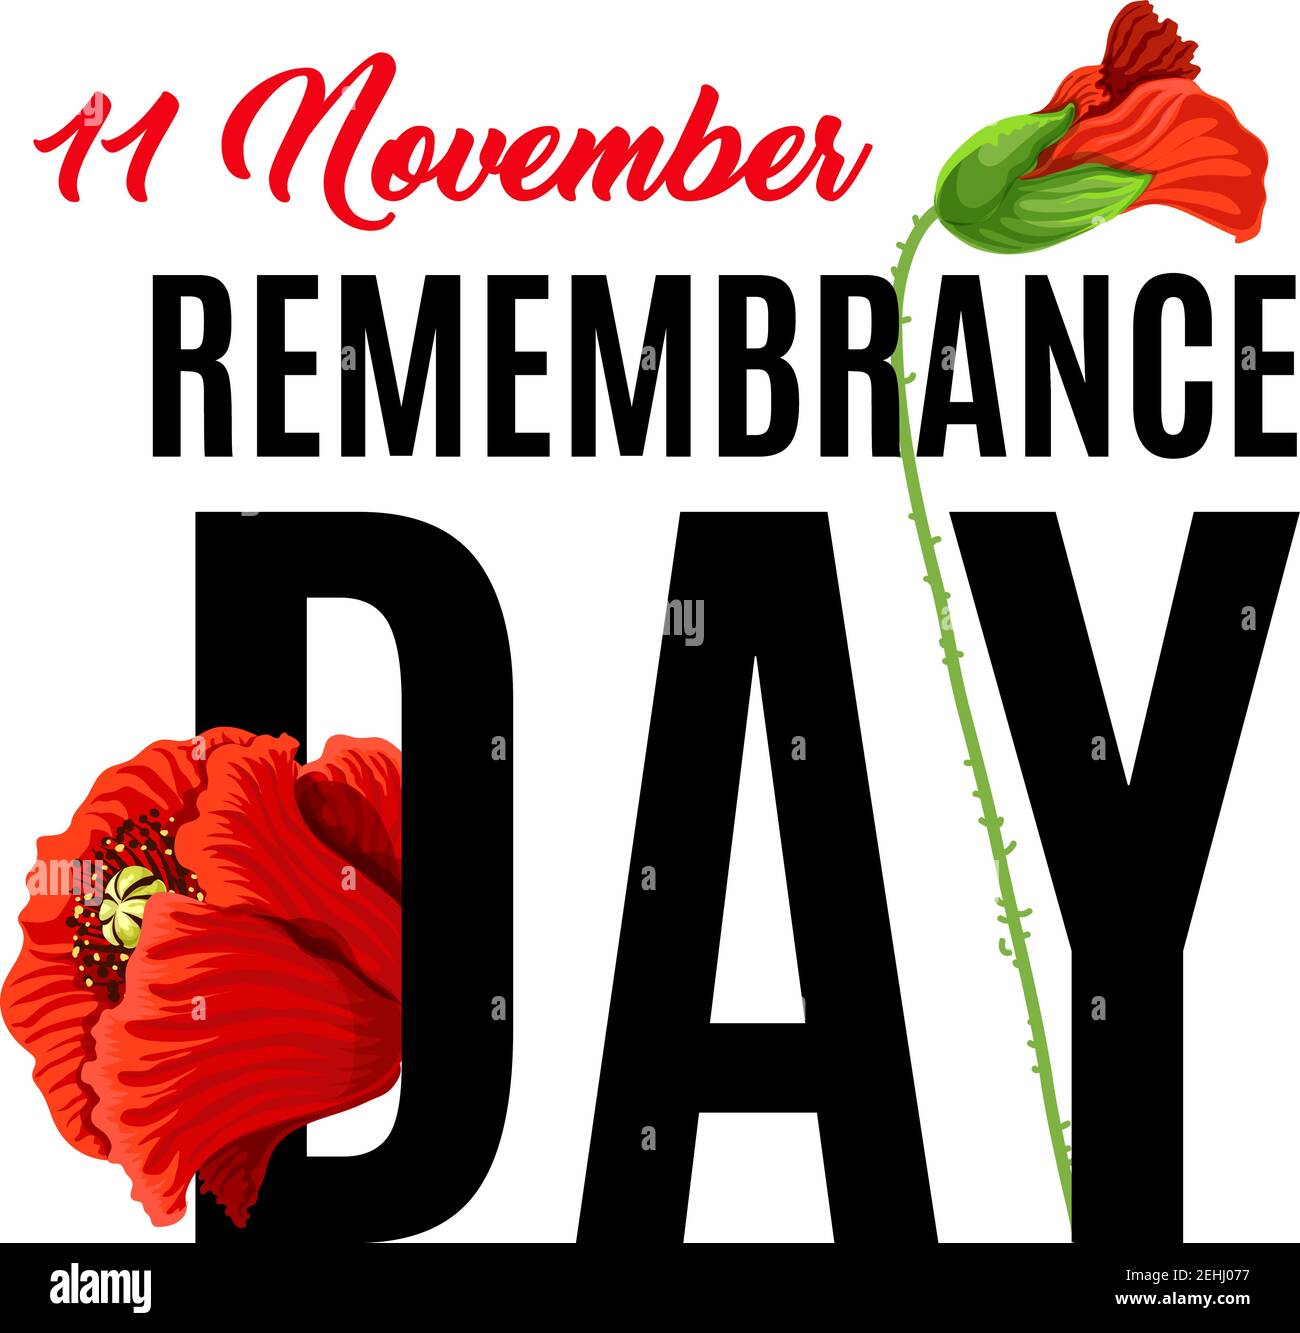 Remembrance day 11 of November also known as Poppy Day. Honoring memory of British soldiers and British Commonwealth. Memory of soldiers killed in the Stock Vector